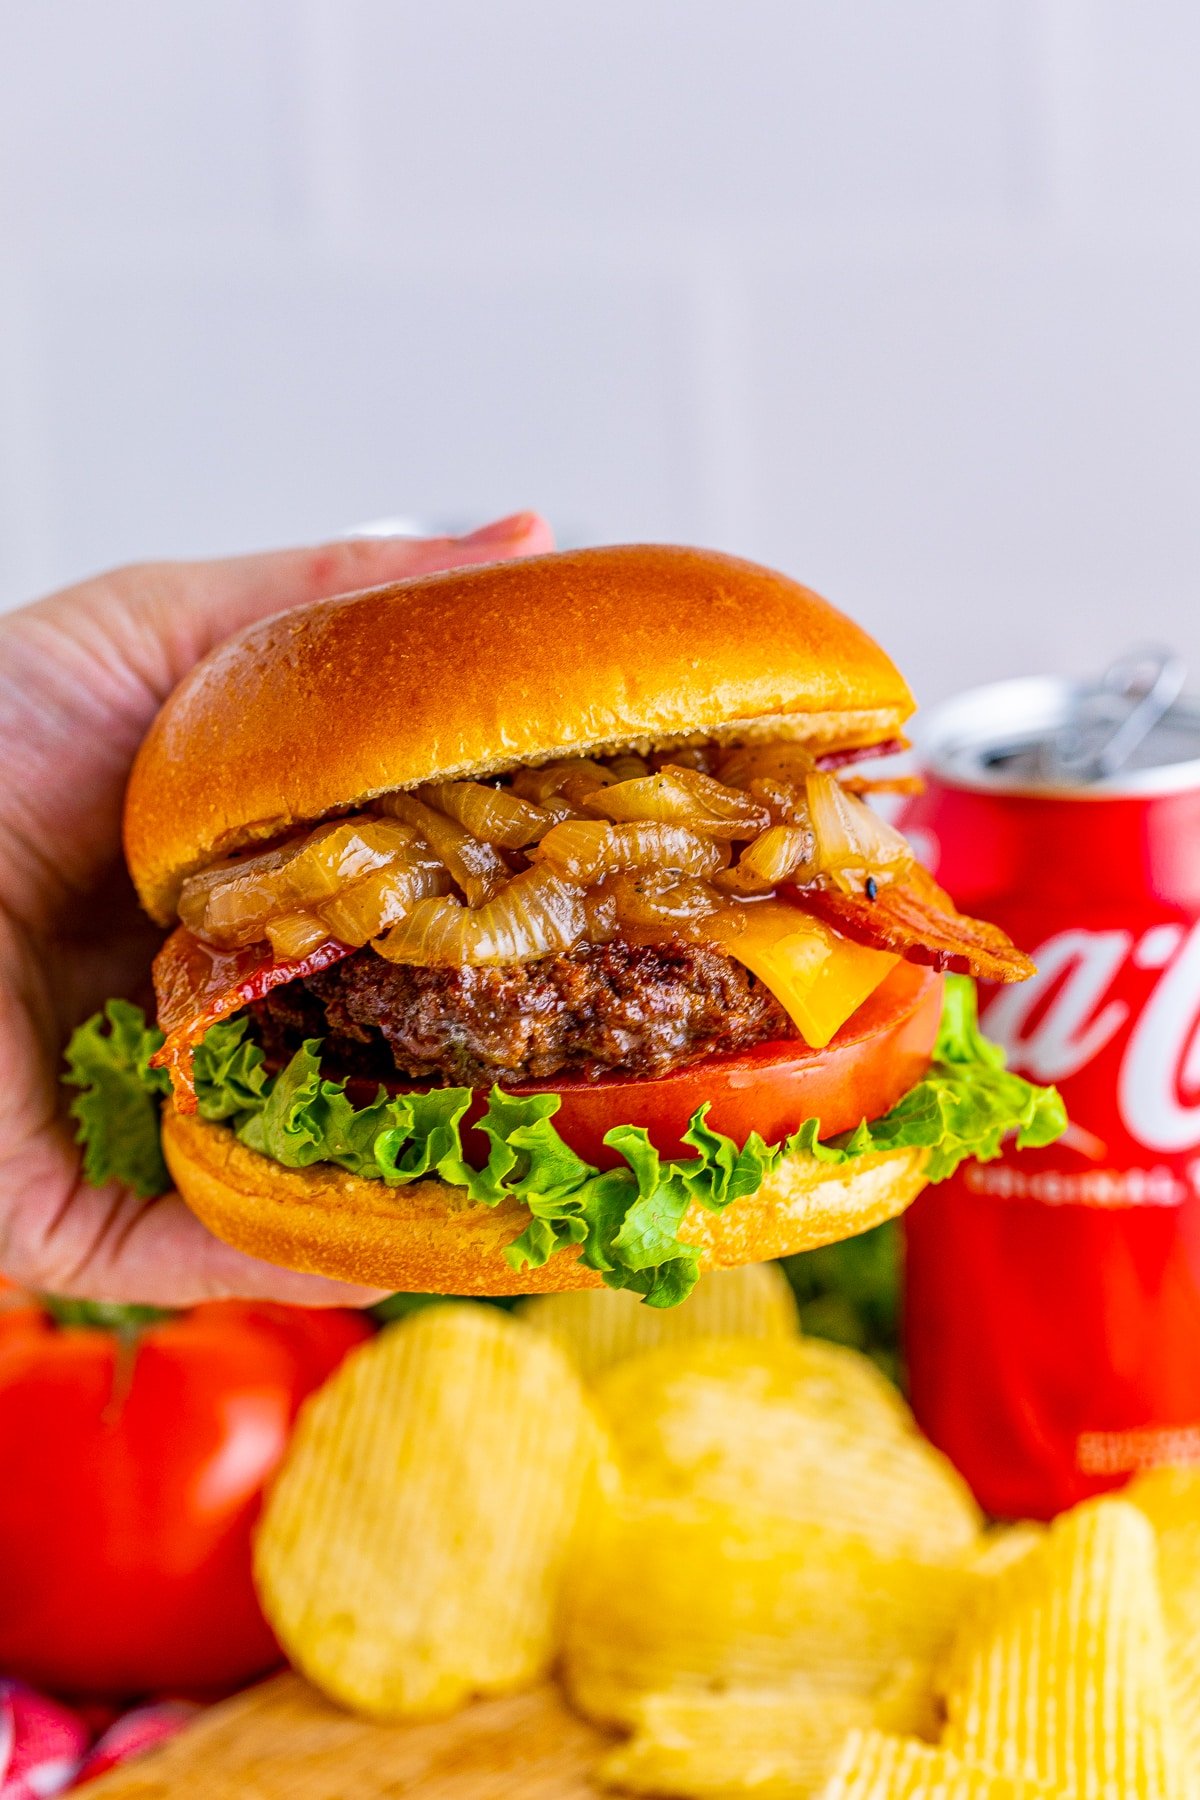 Hand holding up one of the finished Bacon Cheeseburgers with Coca-Cola Onions showing layers.